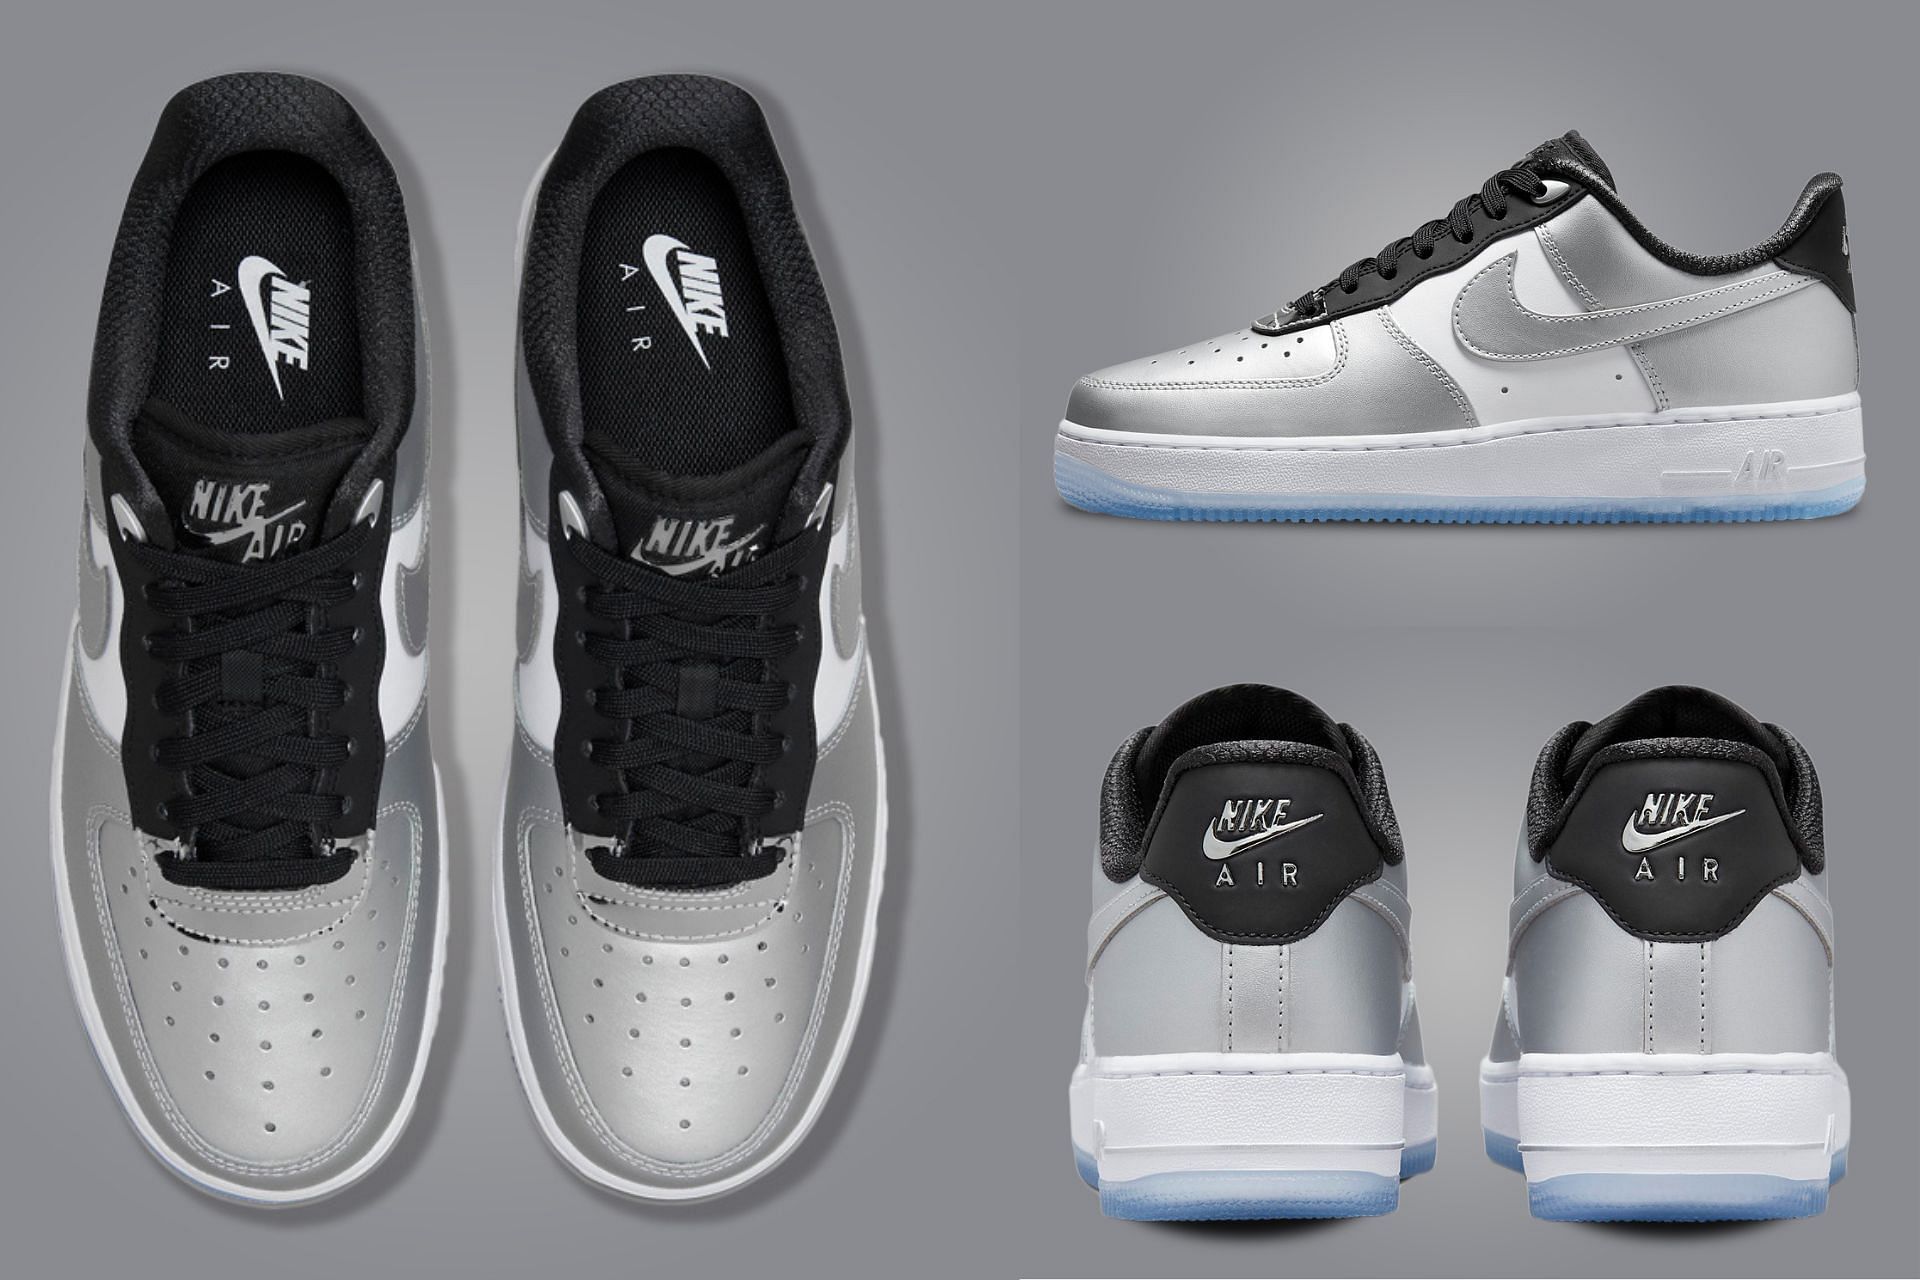 Force 1: Nike Air Force 1 '07 Low “Metallic Silver Black” shoes: Where to buy, price, and more details